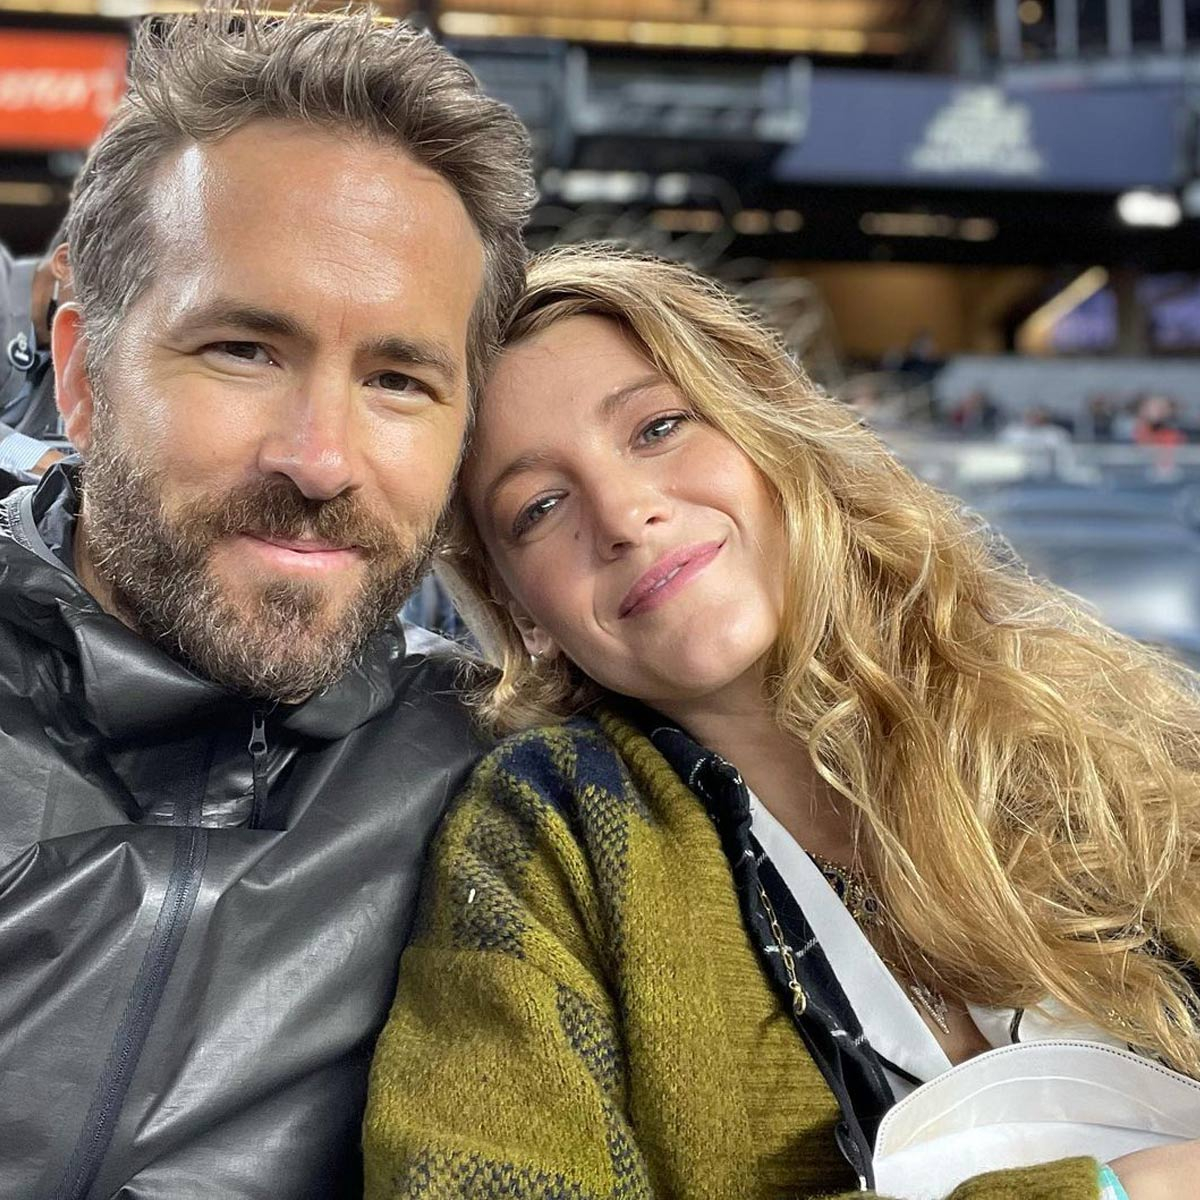 Blake Lively Tempted to Get Thigh Tattoo of Ryan Reynolds’ Face - E! NEWS